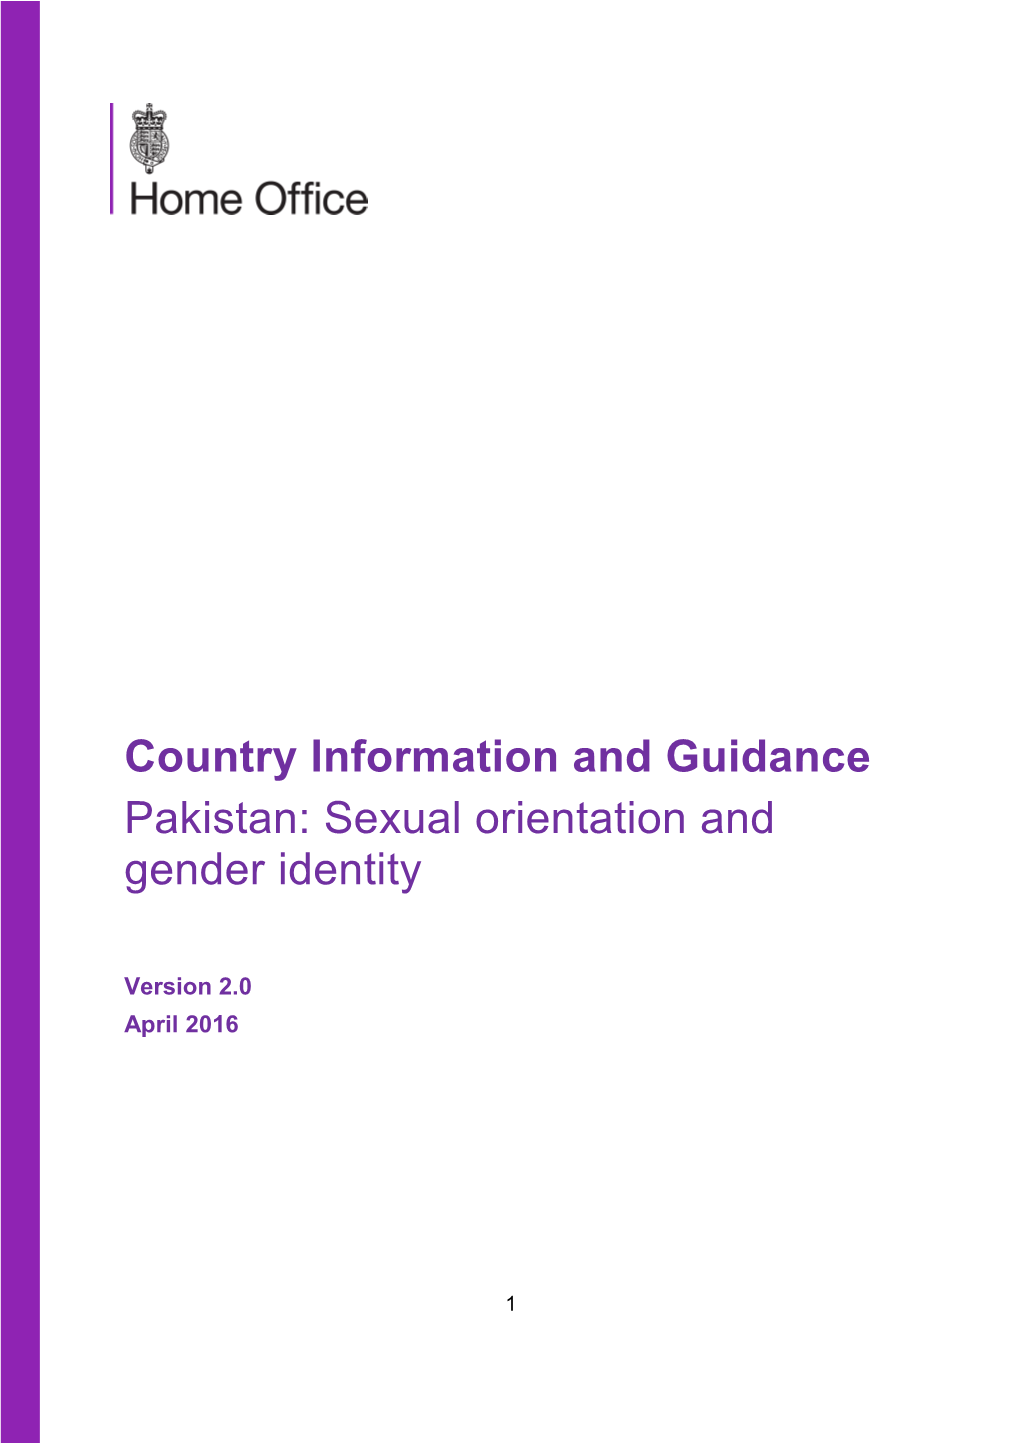 Country Information and Guidance